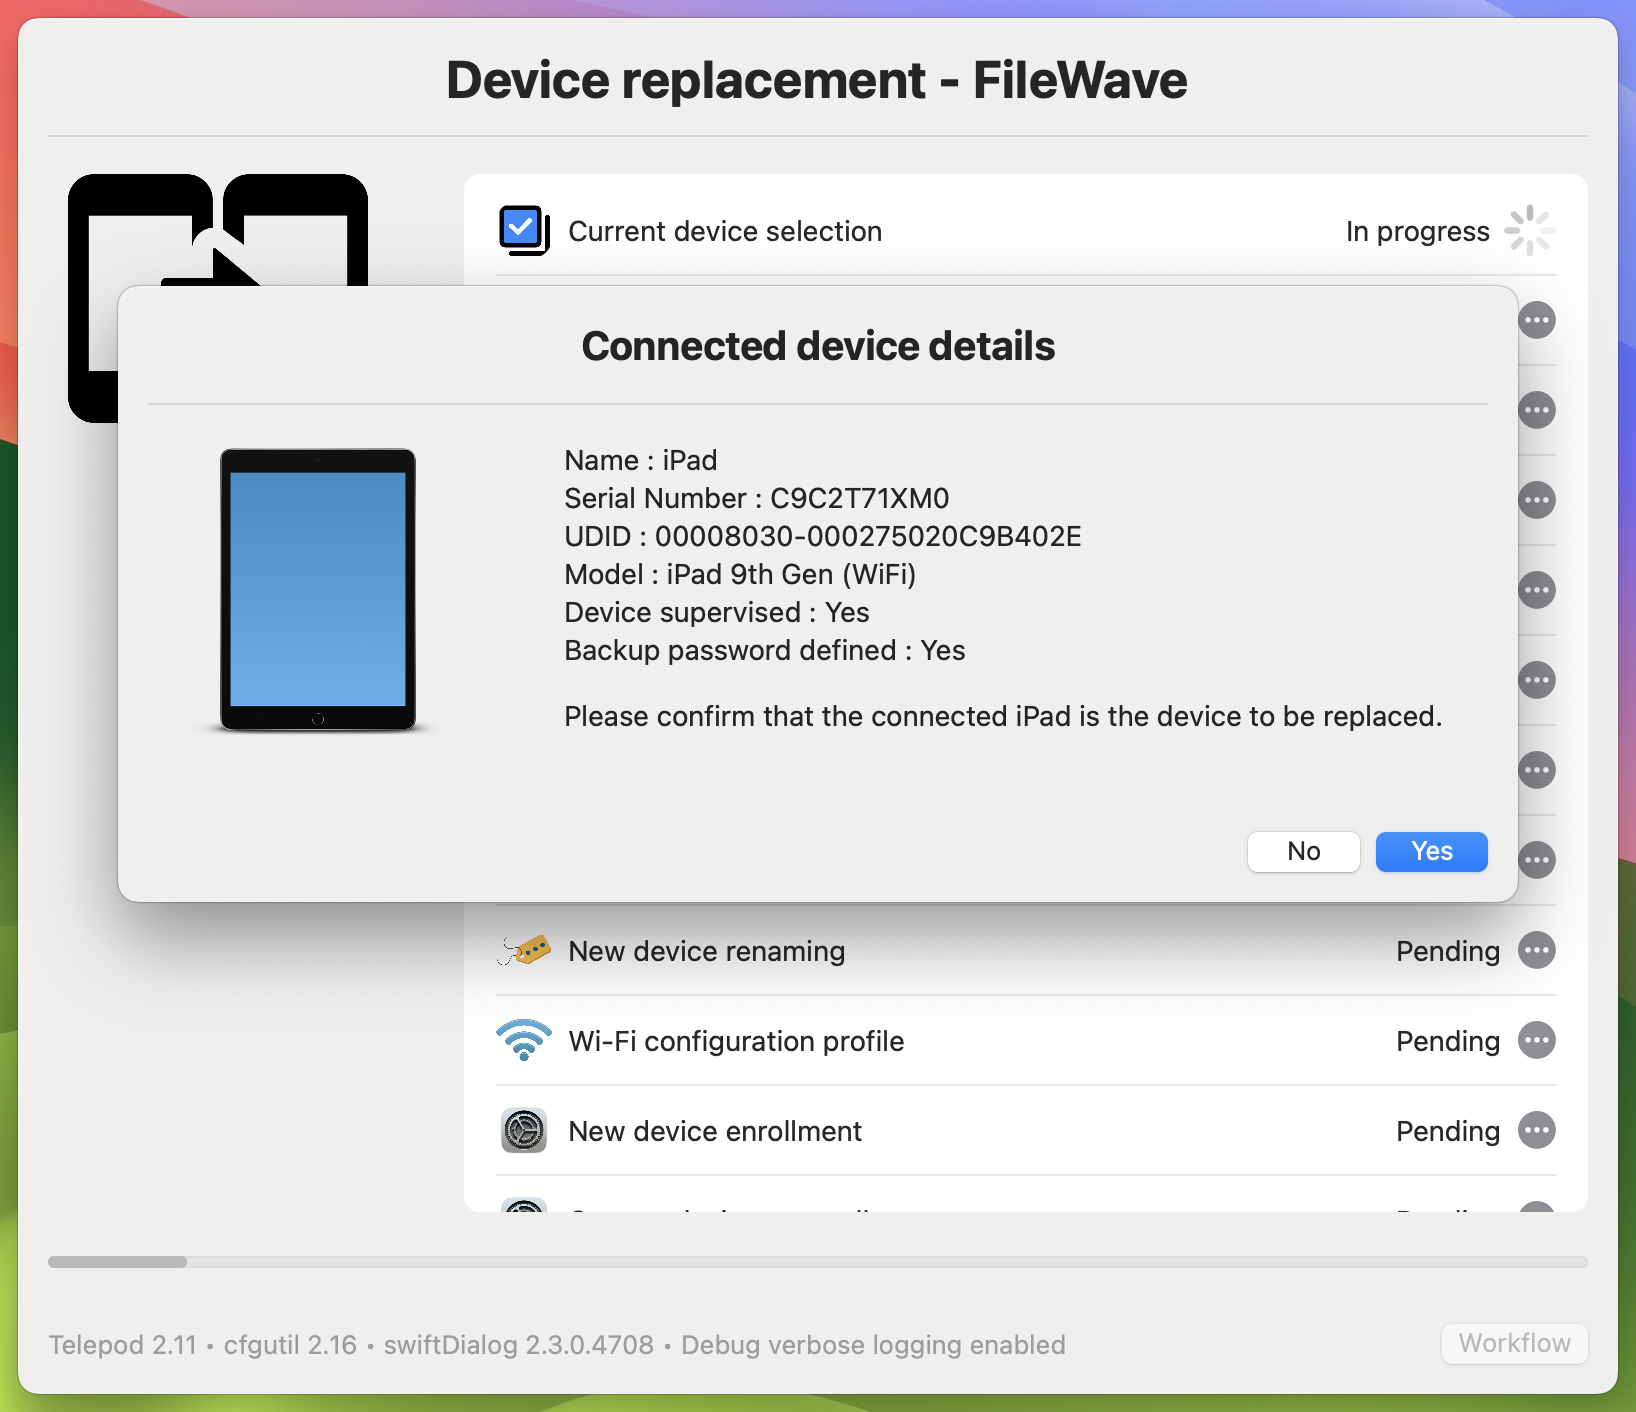 telepod_2_replacement_filewave_005_Current device selection.png